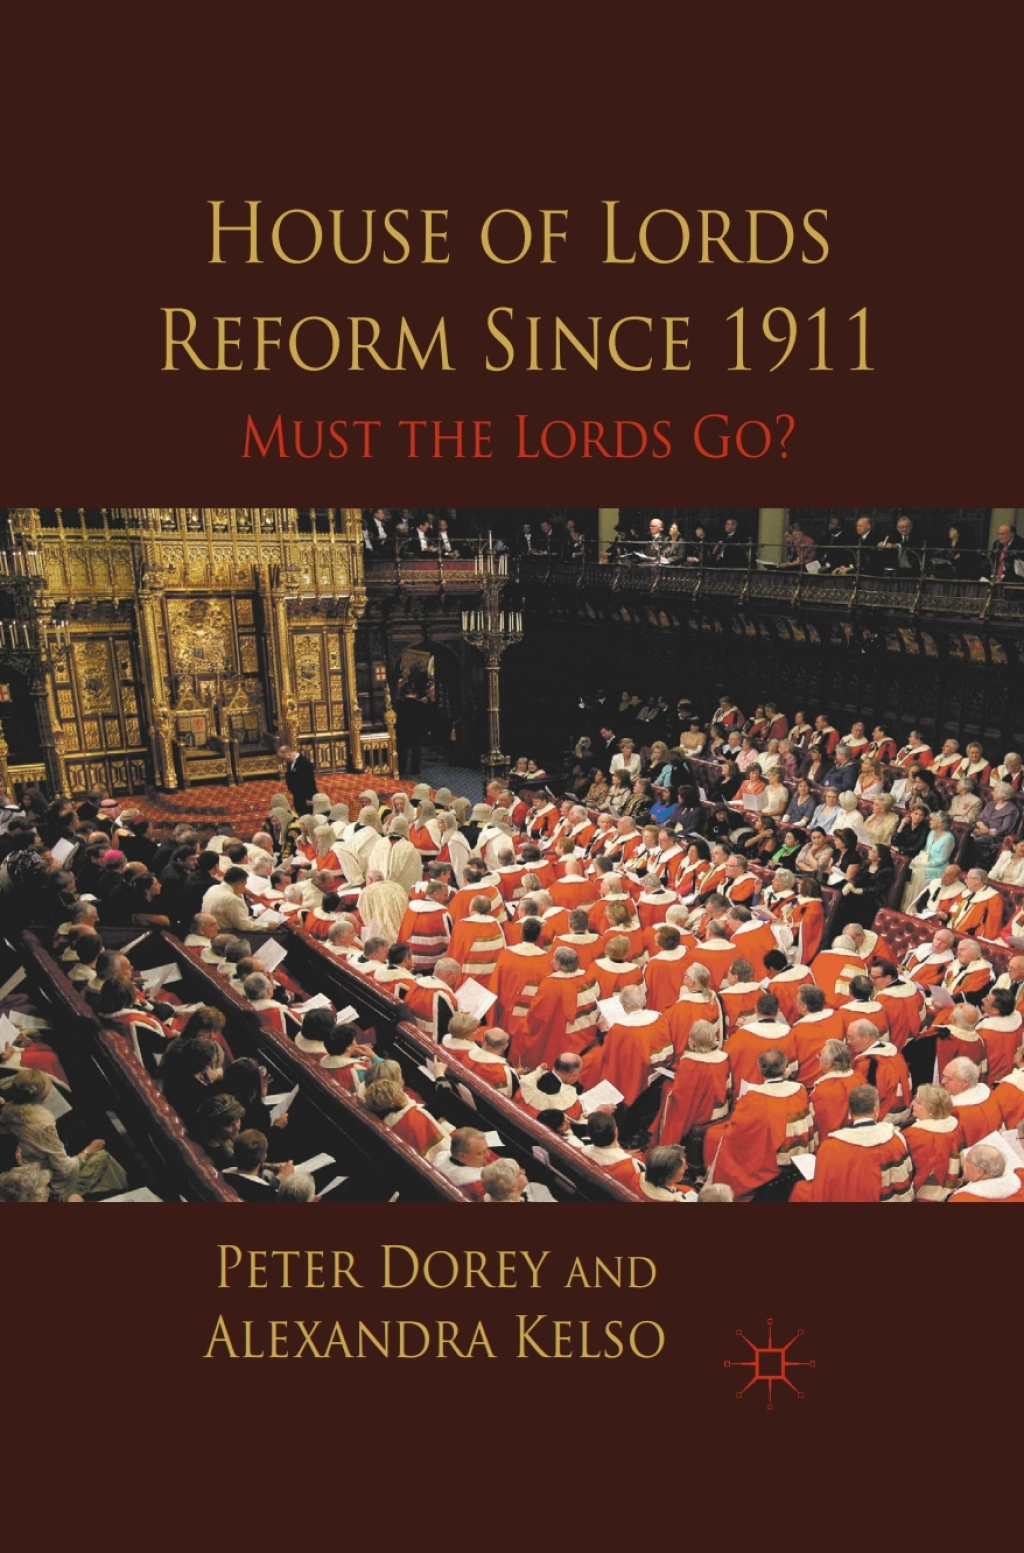 House of Lords Reform Since 1911 (eBook Rental) - P. Dorey; A. Kelso,